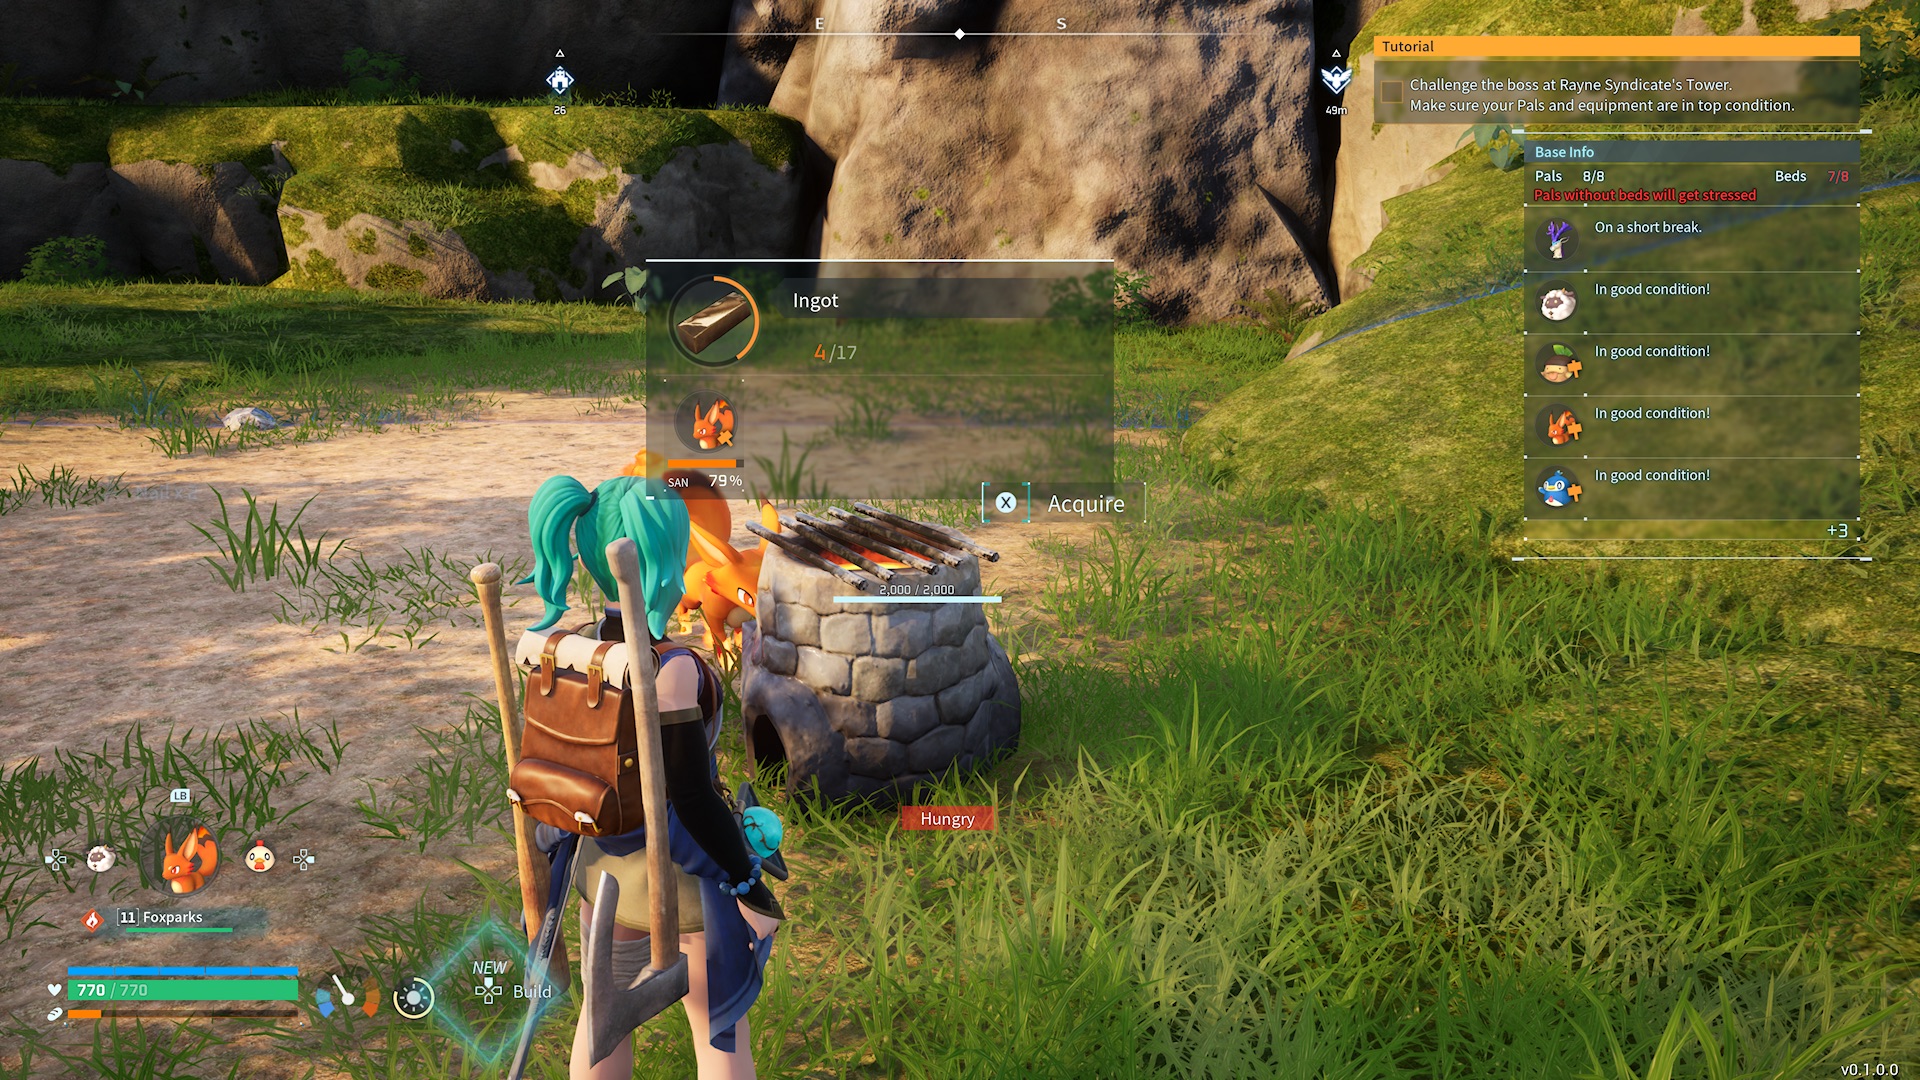 Players watch the Fox Park companions use the Primordial Furnace to create ingots